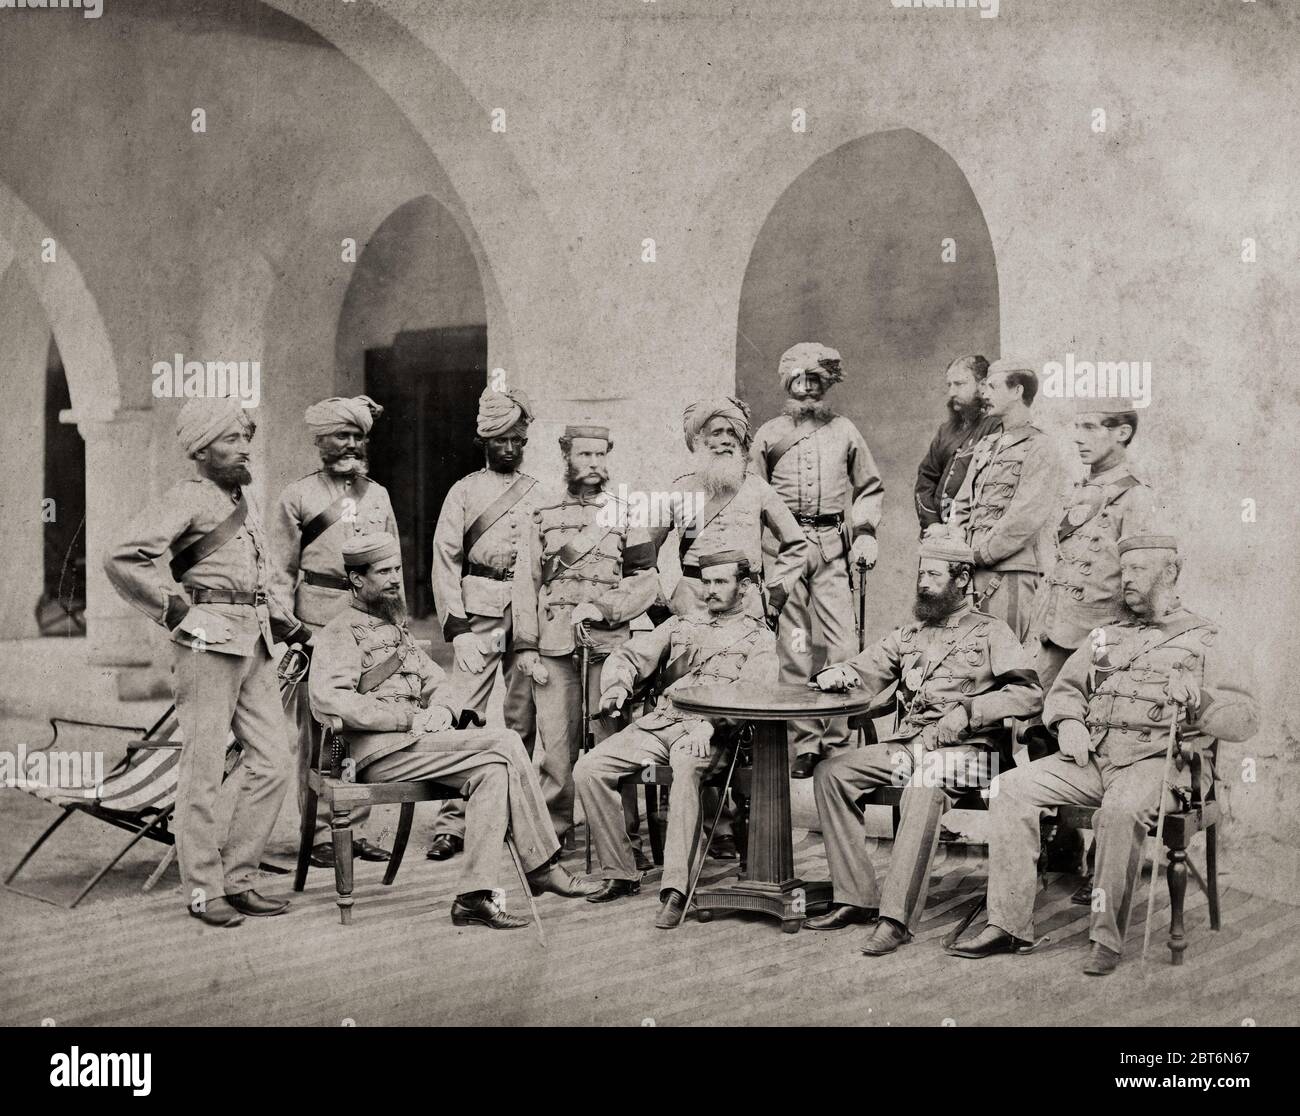 Vintage 19th century photograph - British army in India - officers of the 21st Punjab Infantry, 1866 Stock Photo